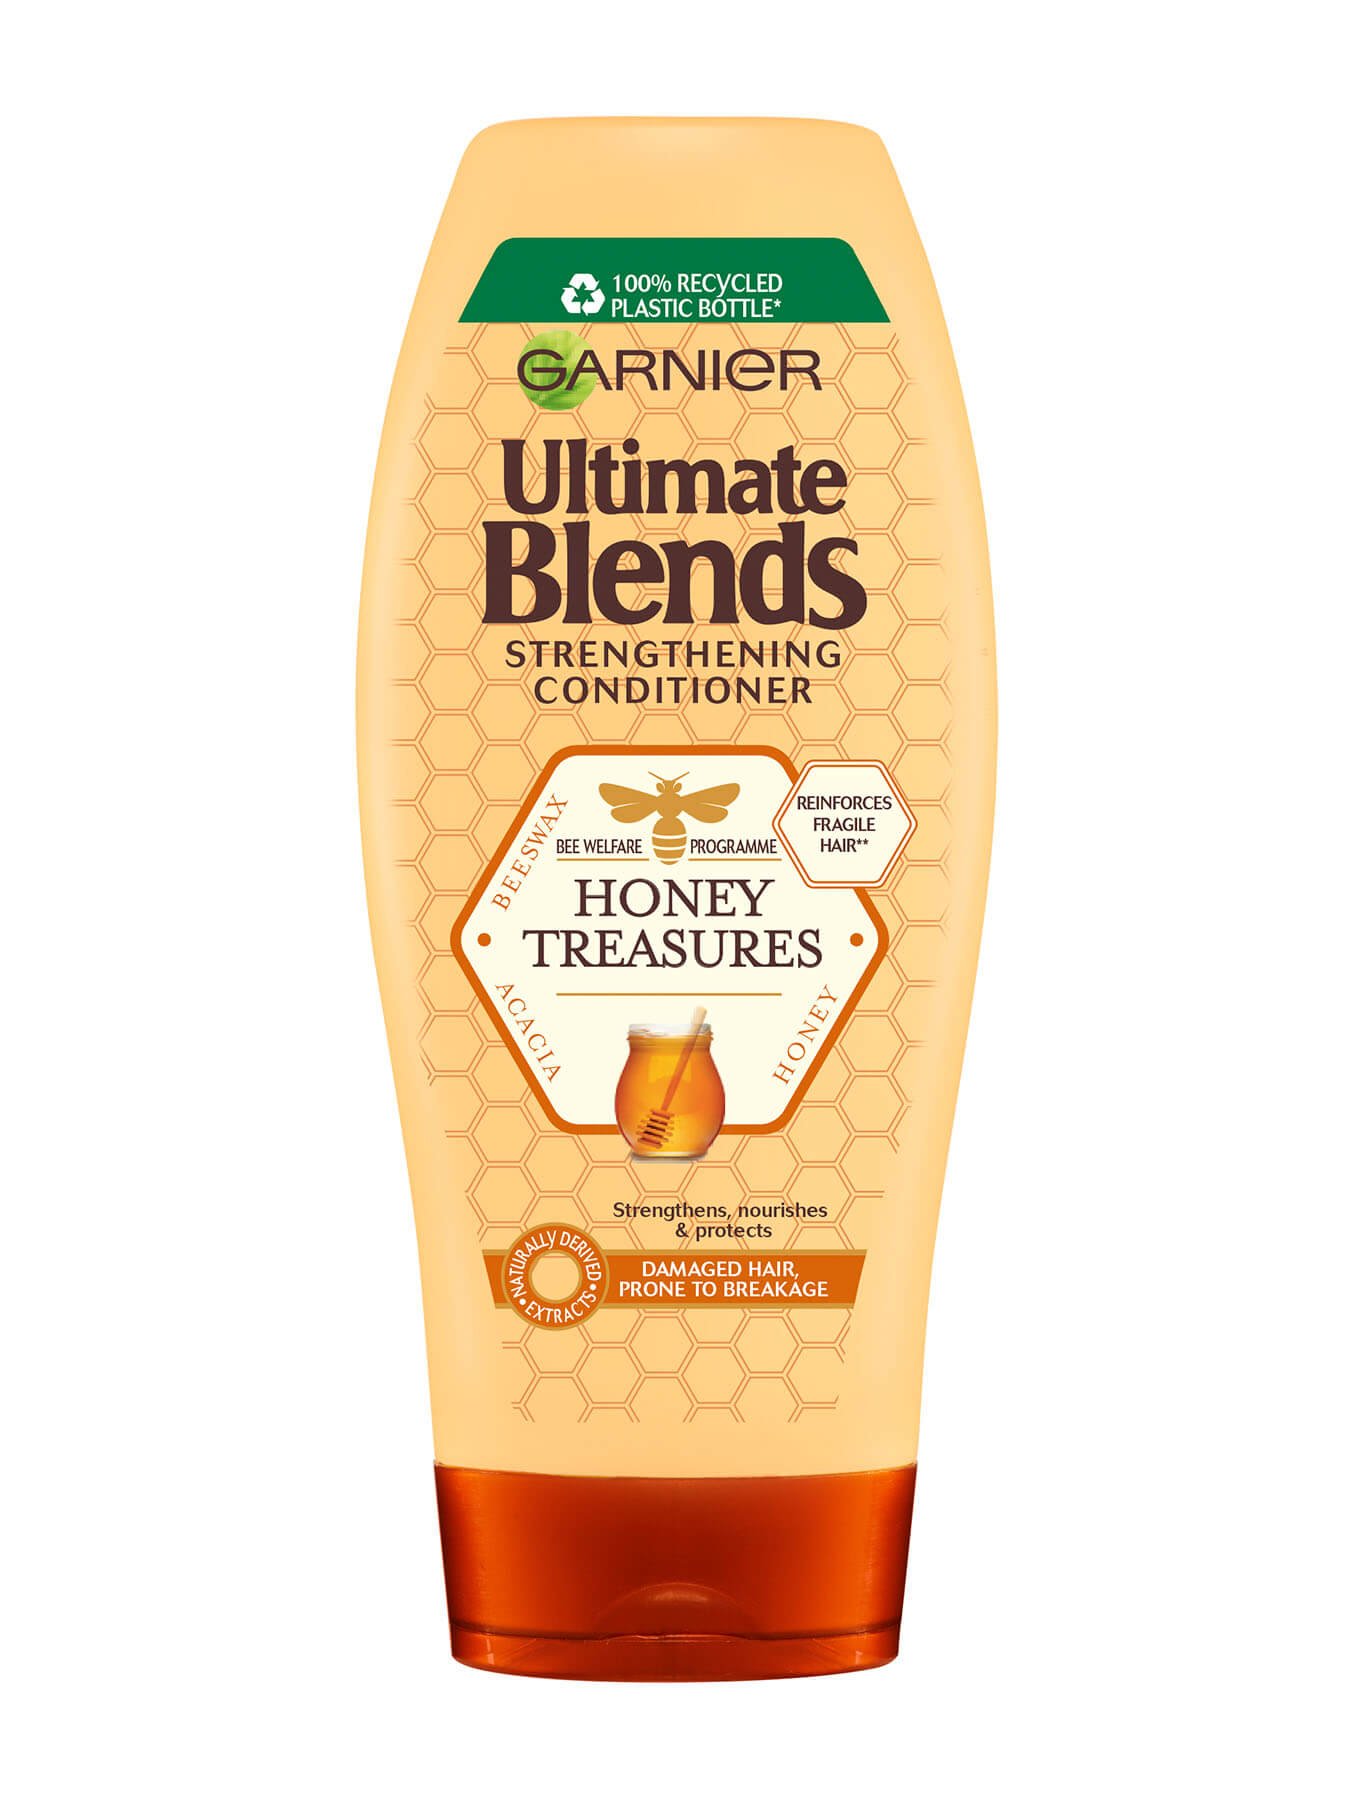 Ultimate Blends Honey Treasures Conditioner front of pack